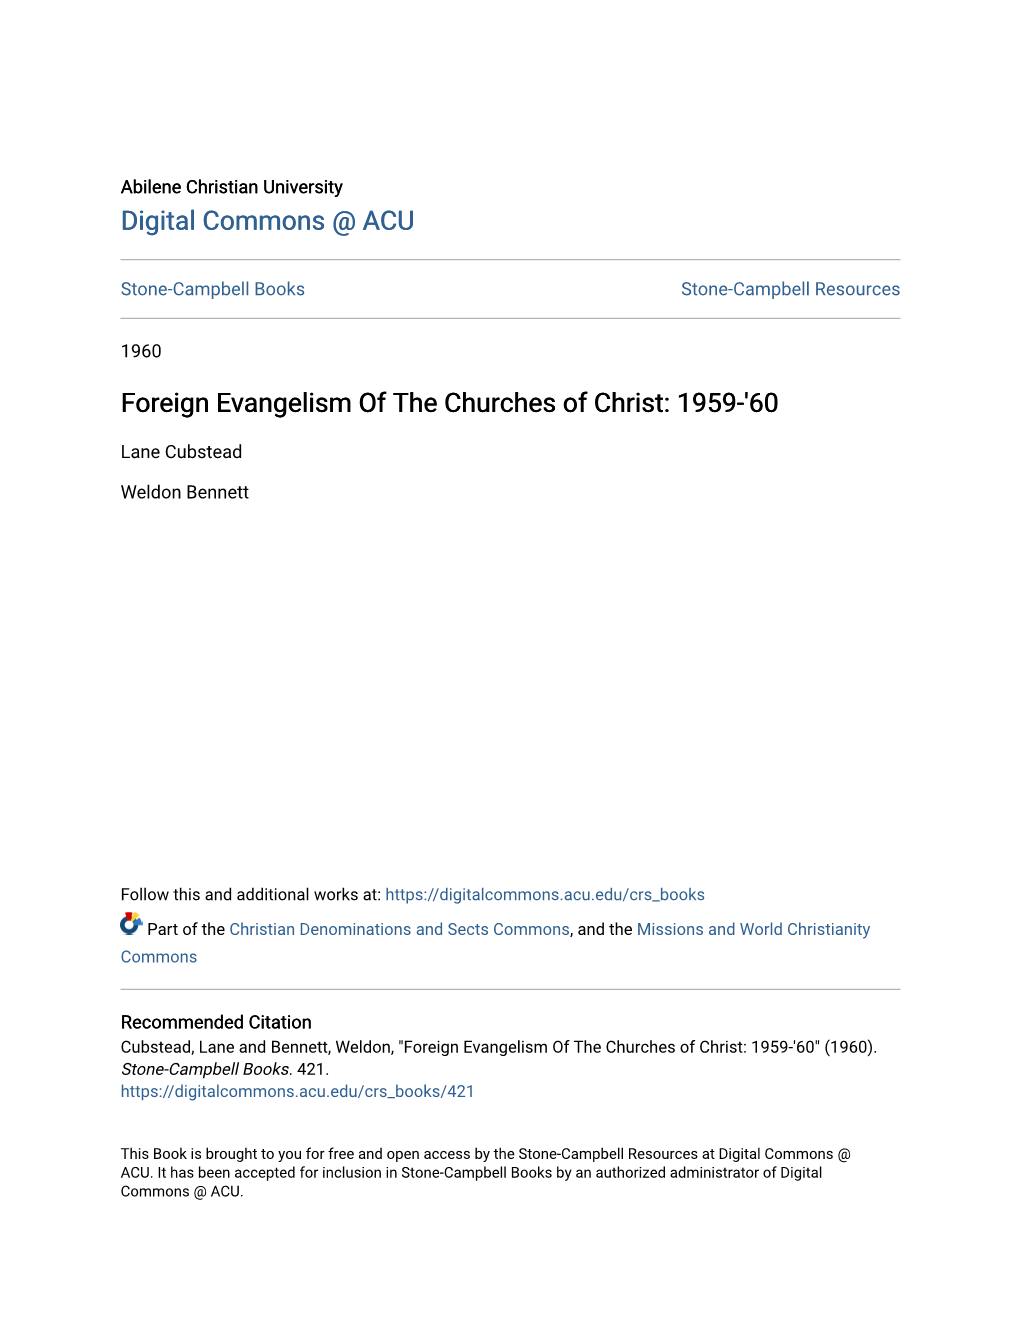 Foreign Evangelism of the Churches of Christ: 1959-'60